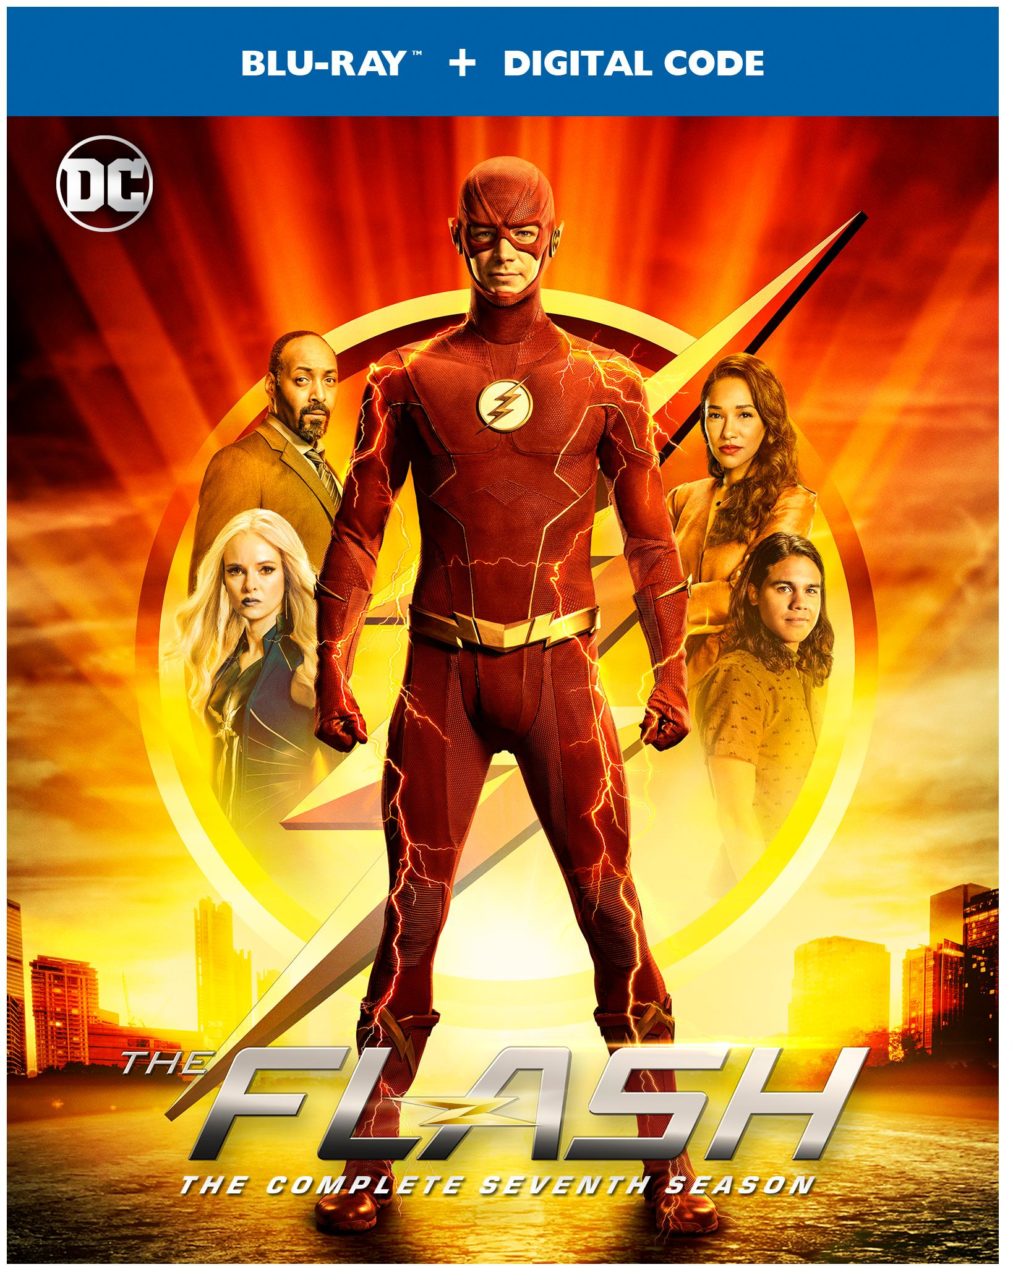 The Flash: The Complete Seventh Season Blu-Ray Combo Pack cover (Warner Bros. Home Entertainment)